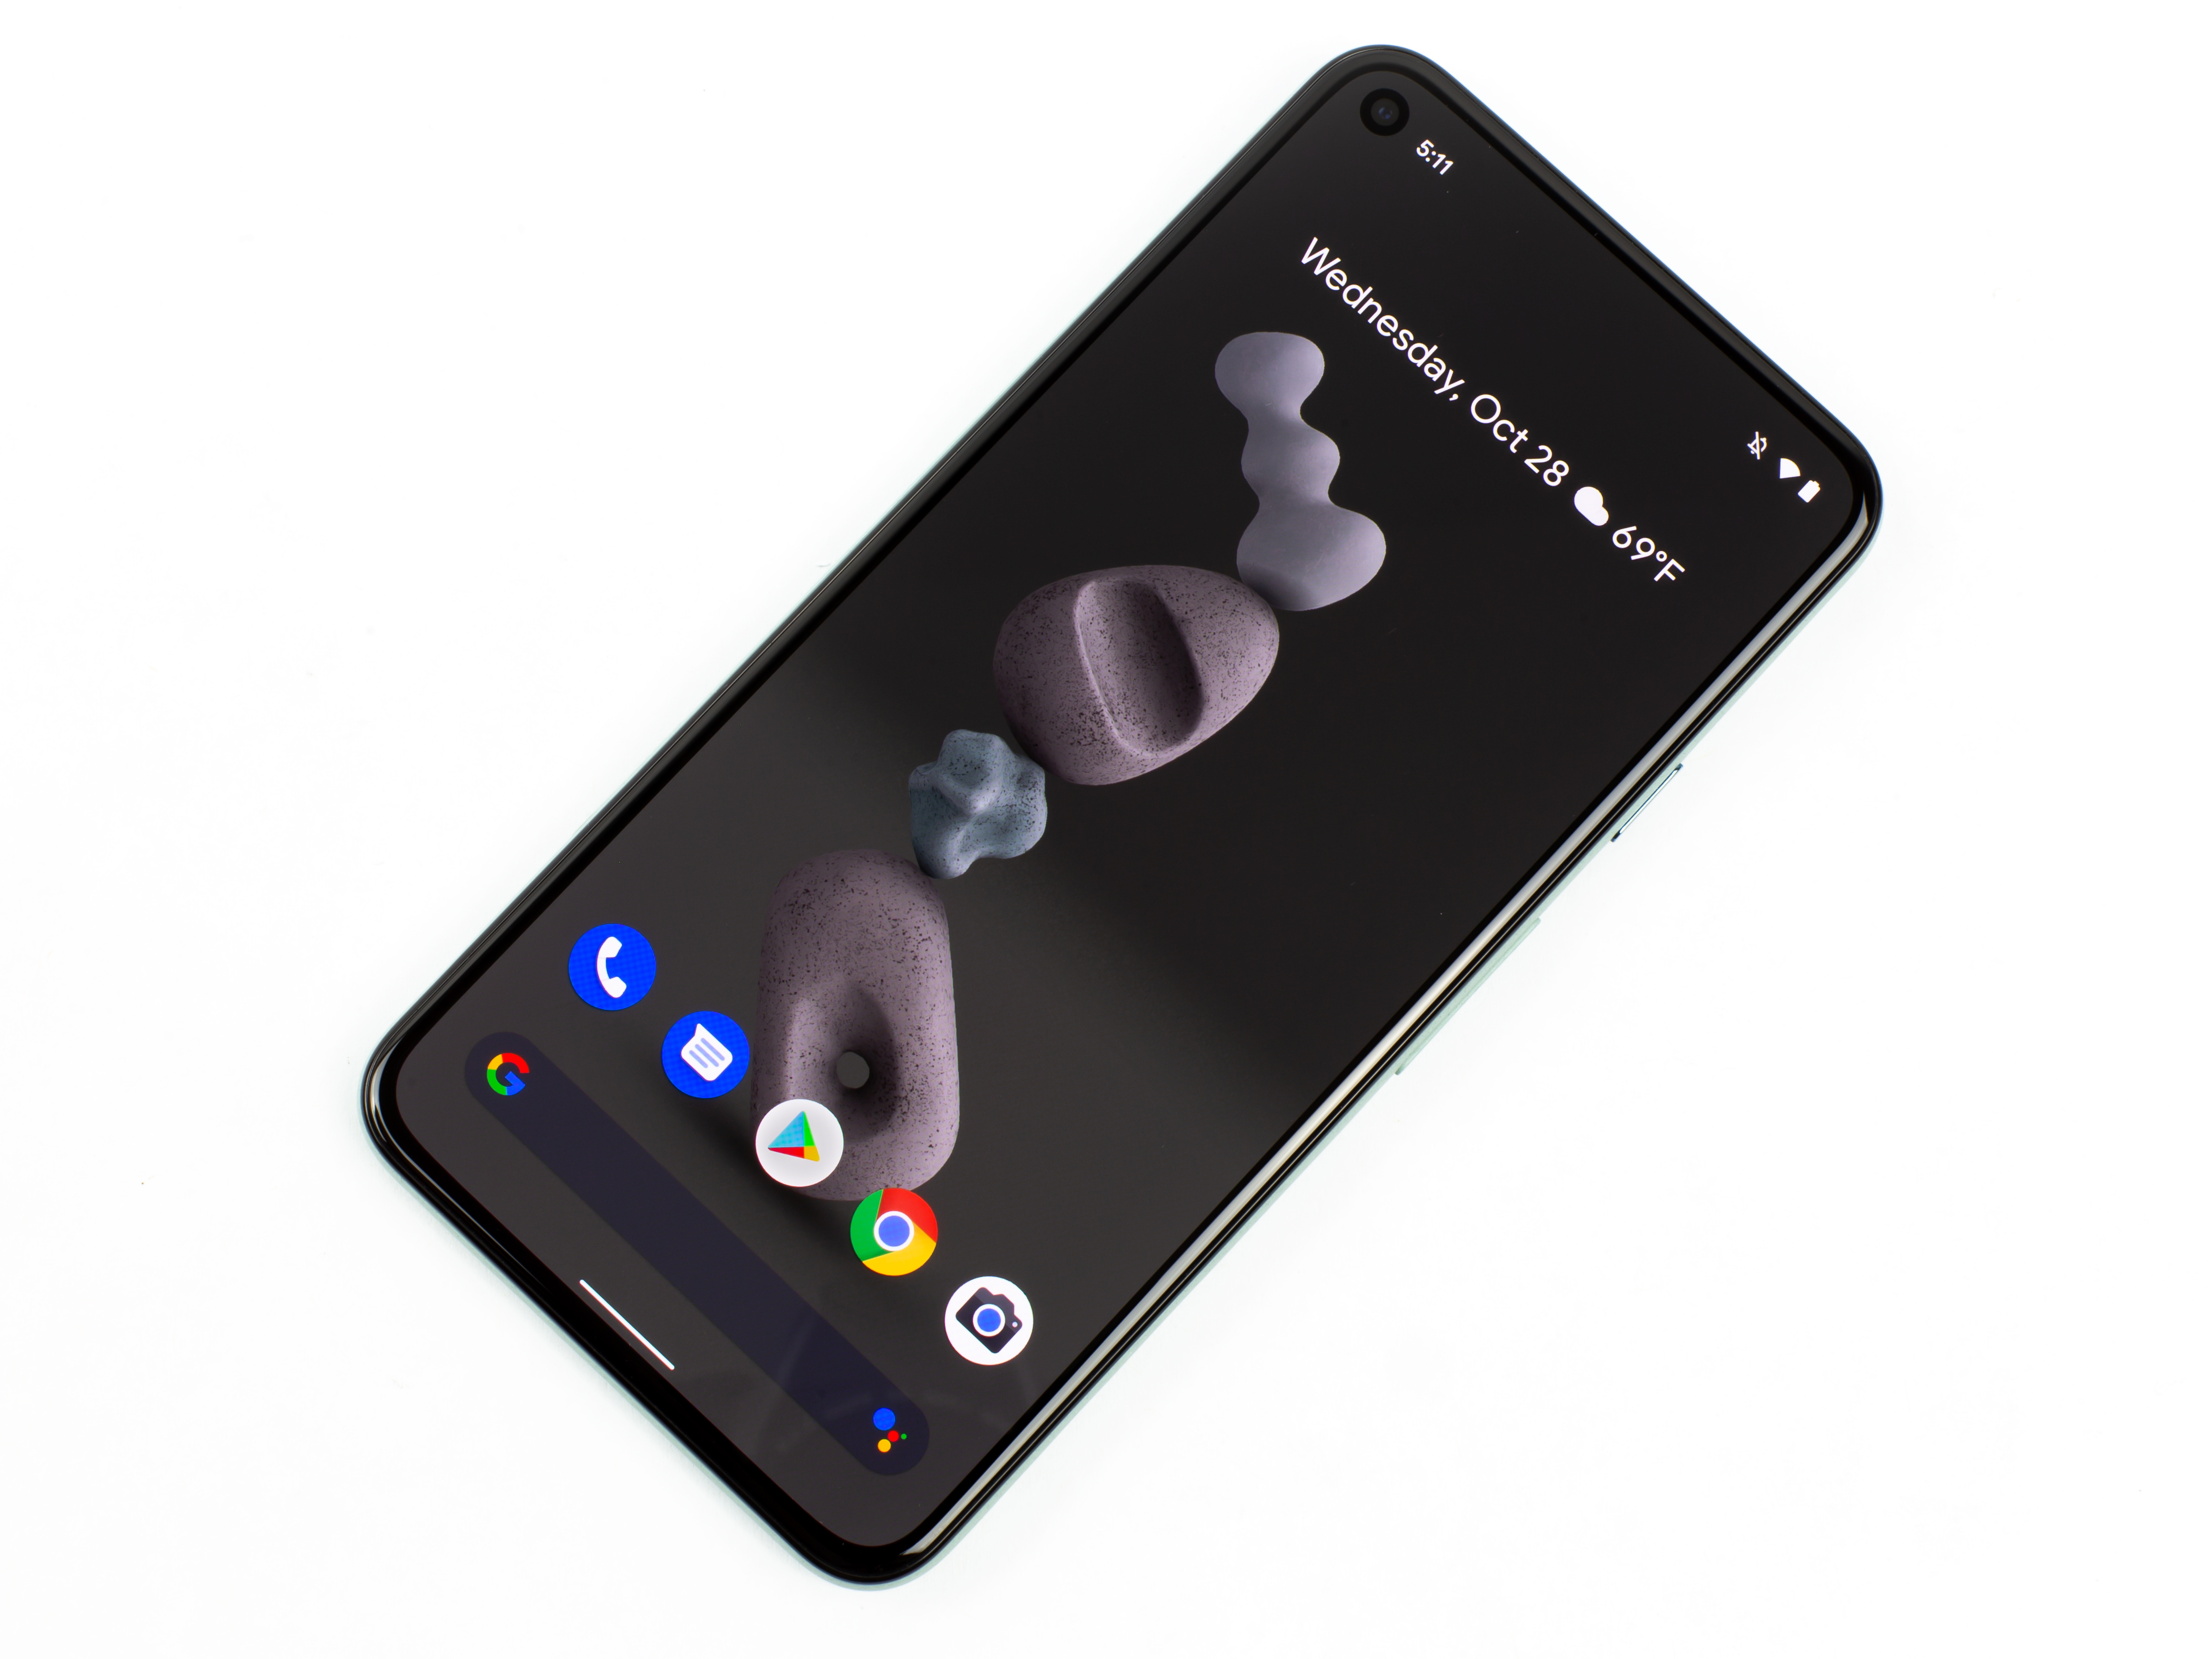 Pixel 5 review: Google spends its bill-of-materials budget unwisely